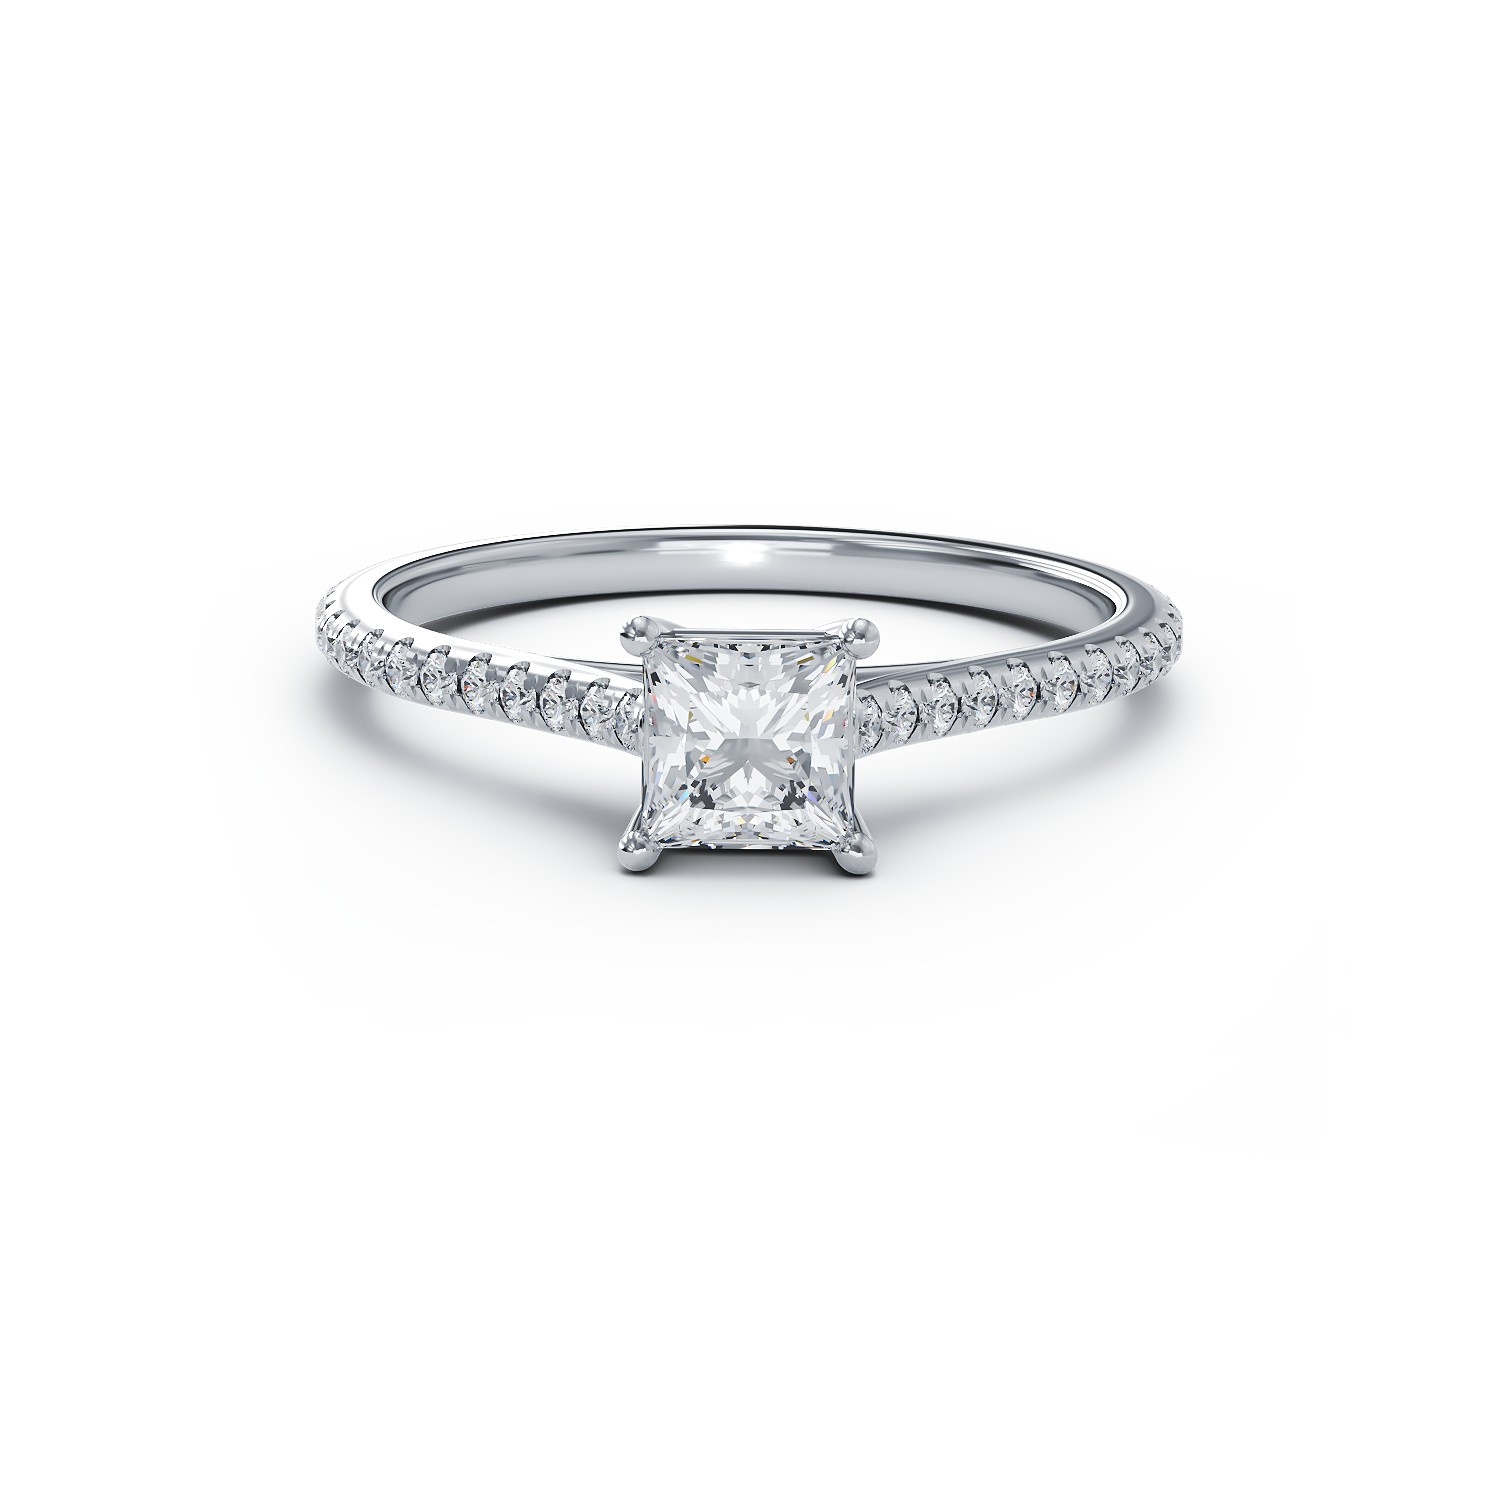 18K white gold engagement ring with one 0.61ct diamond and 0.186ct diamonds